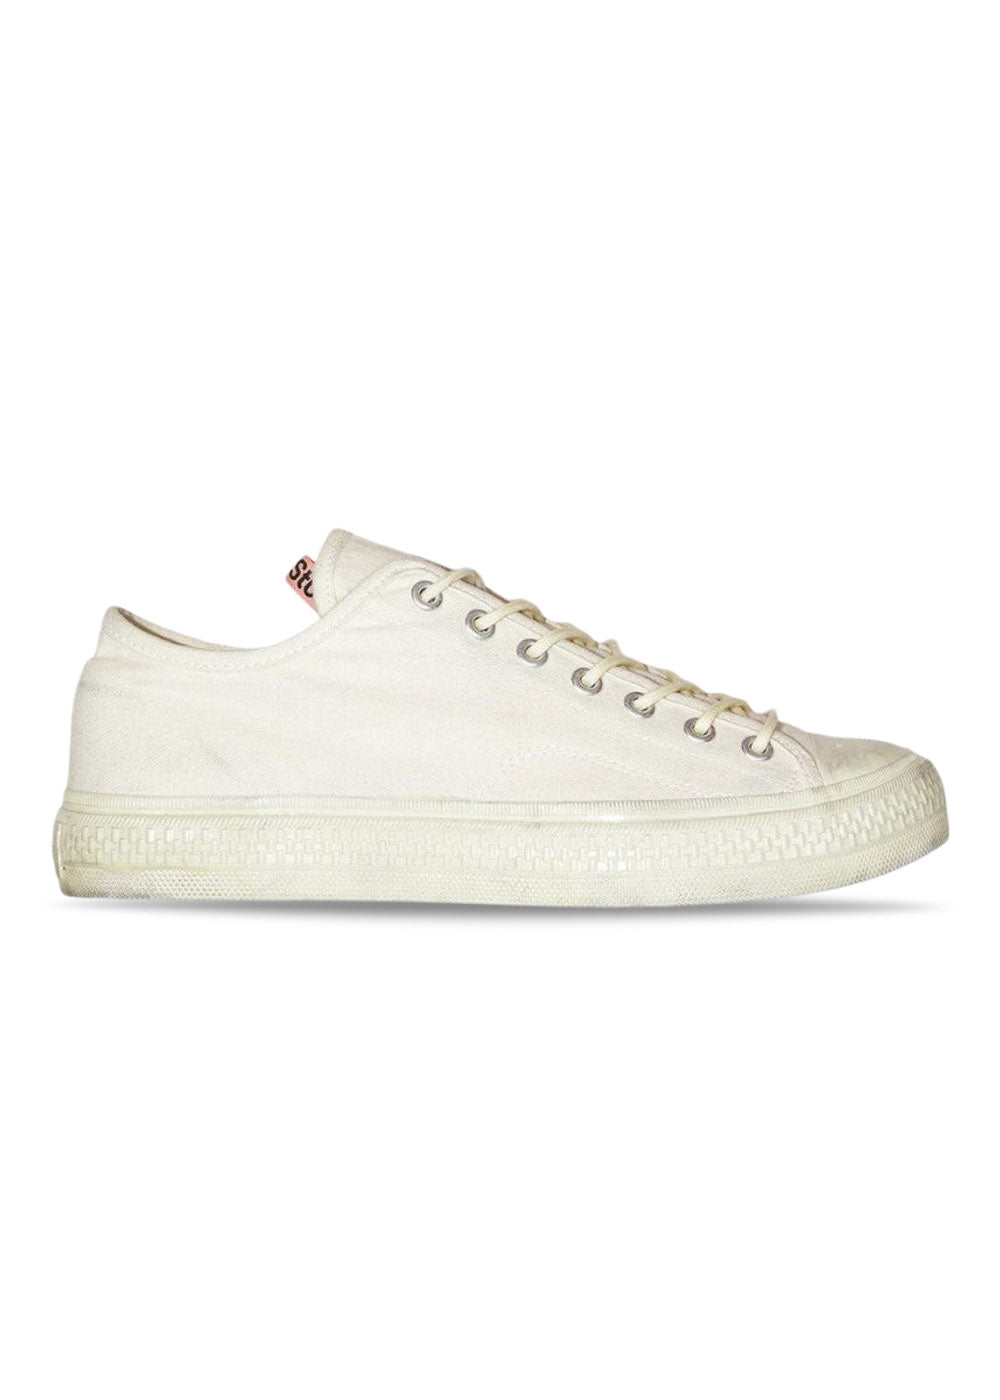 Acne Studios' Ballow Tumbled W - Off White/Off White. Køb sneakers her.